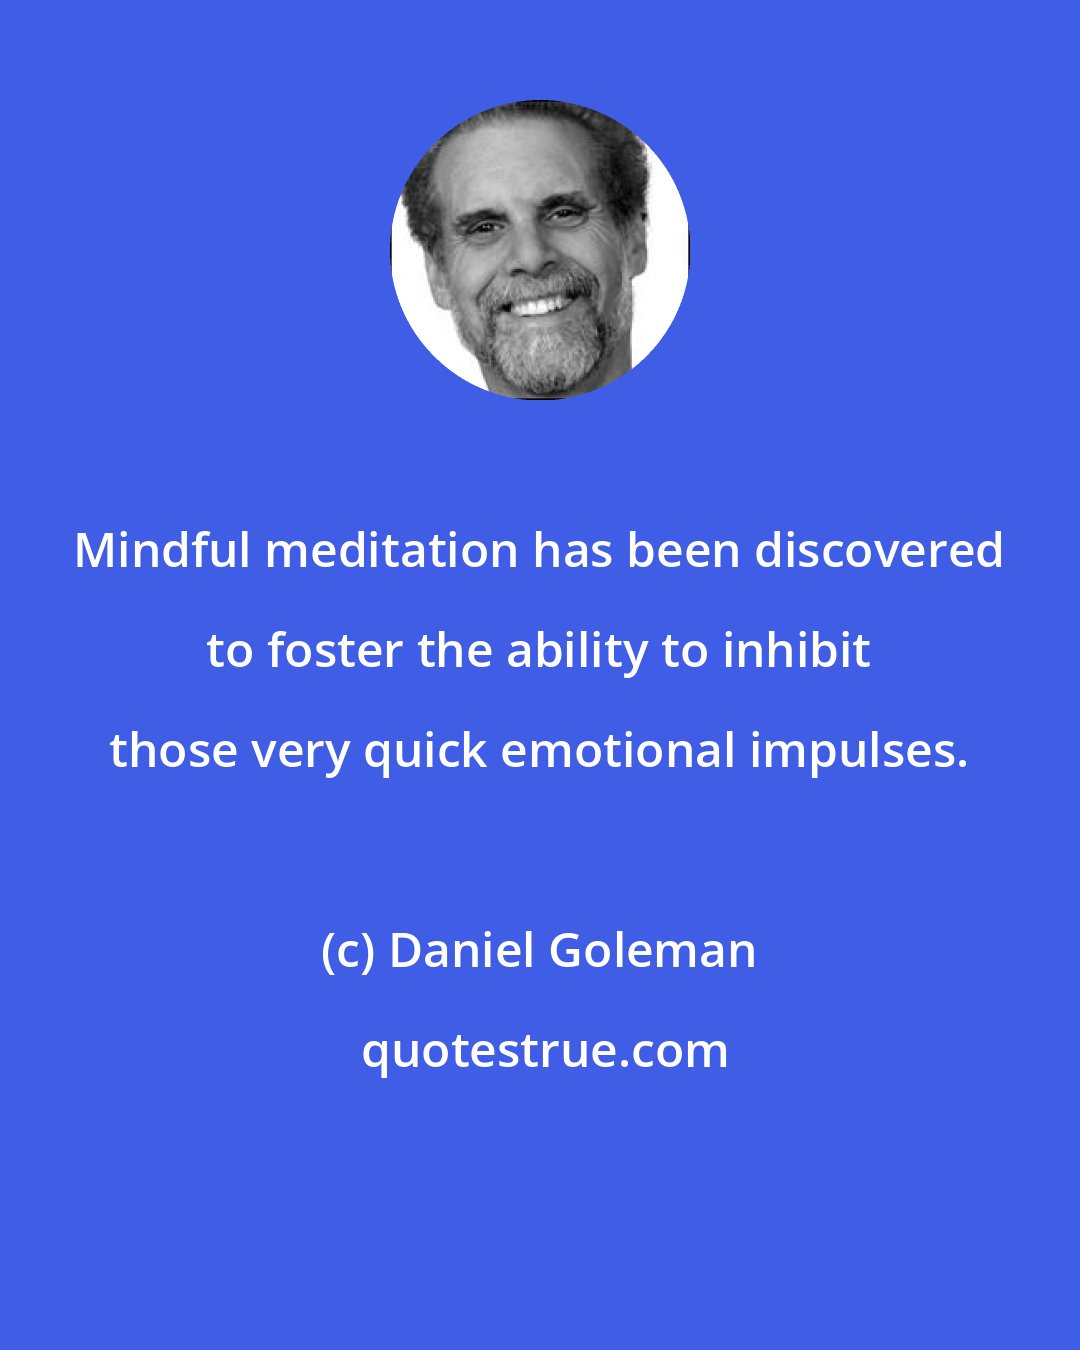 Daniel Goleman: Mindful meditation has been discovered to foster the ability to inhibit those very quick emotional impulses.